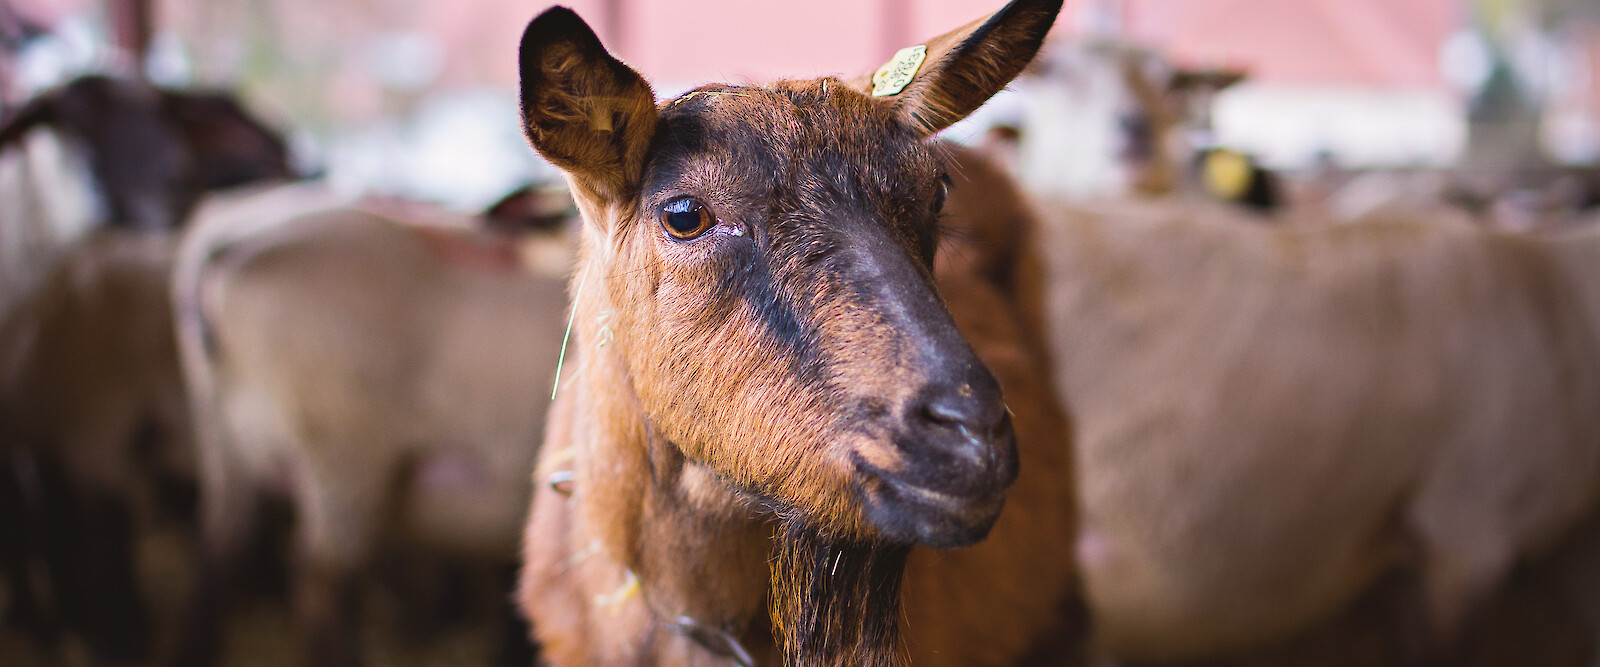 Young brown goat in stable (AdobeStock_104767701).